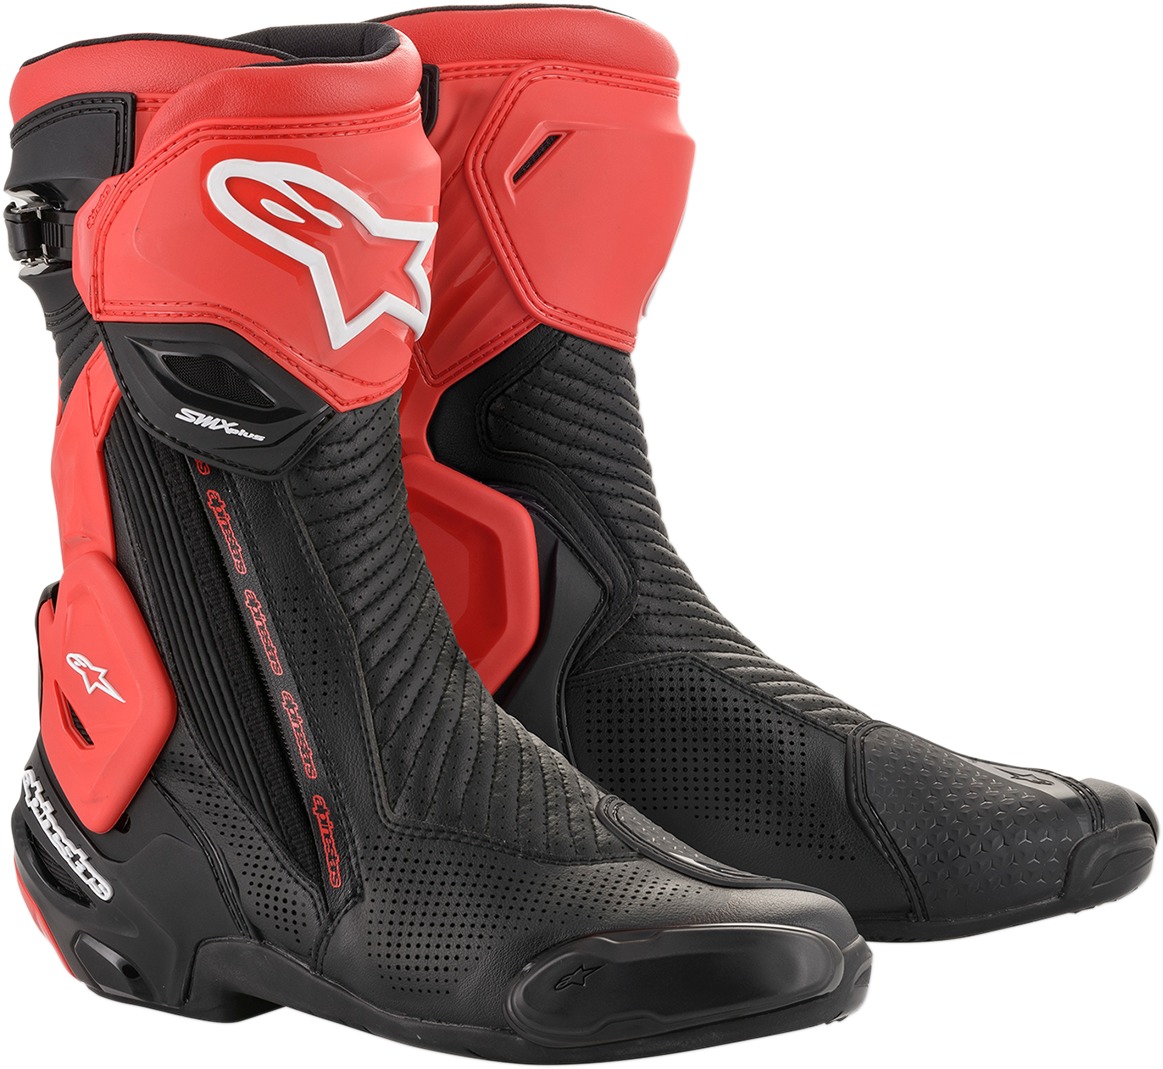 SMX Plus Street Riding Boots Black/Red US 8 - Click Image to Close